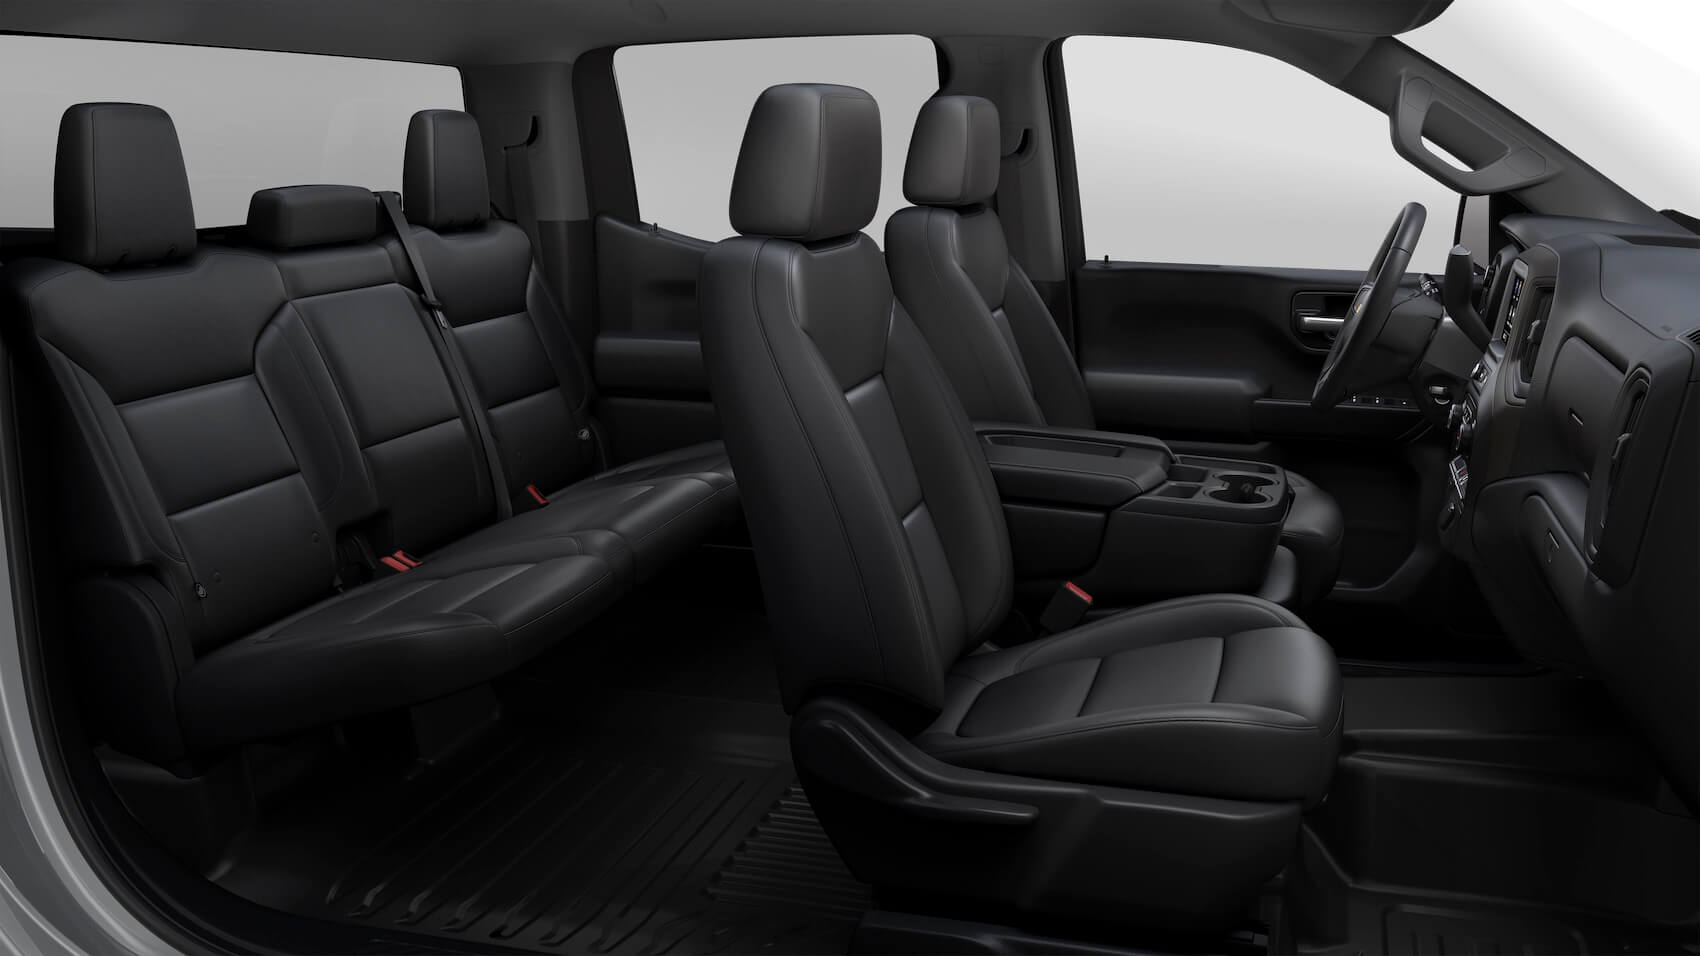 Chevy Silverado 1500 Seating and black leather interior